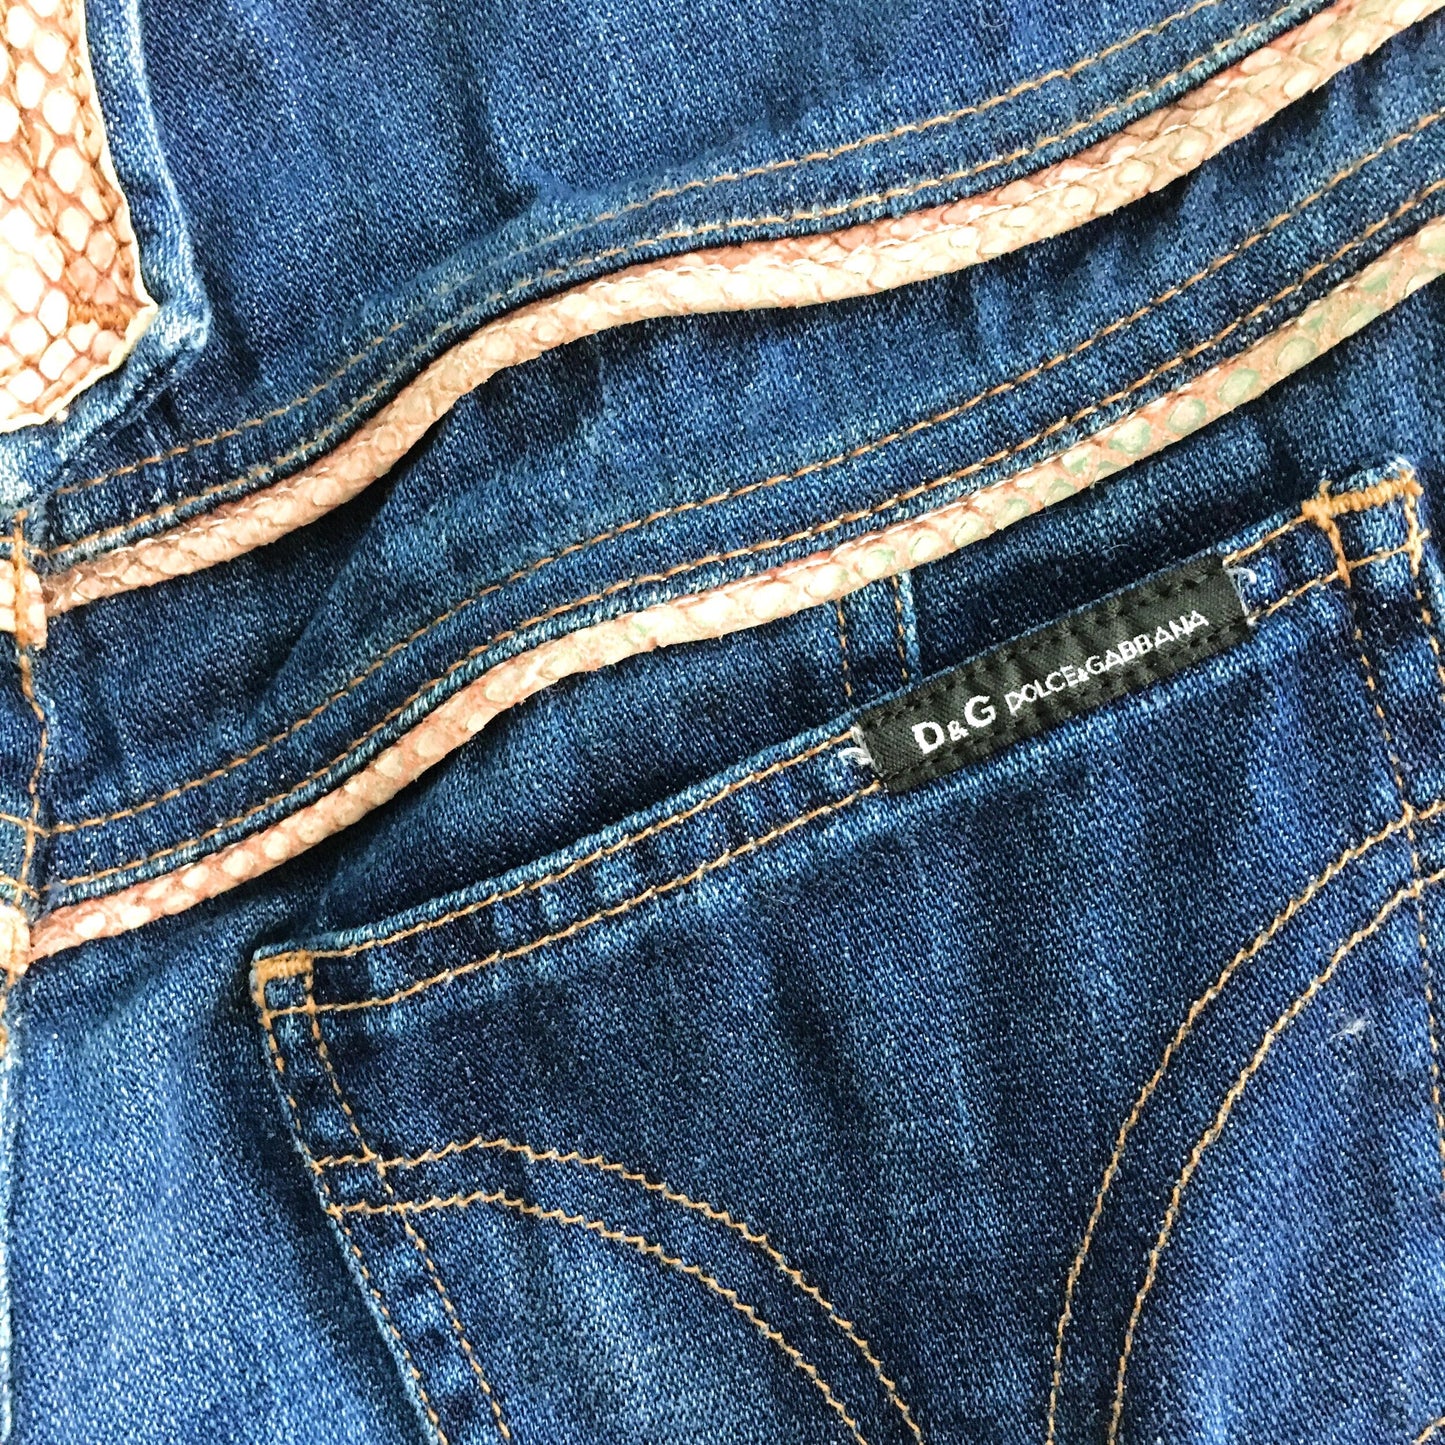 d&g dolce & gabbana low rise western flare jeans - size 28